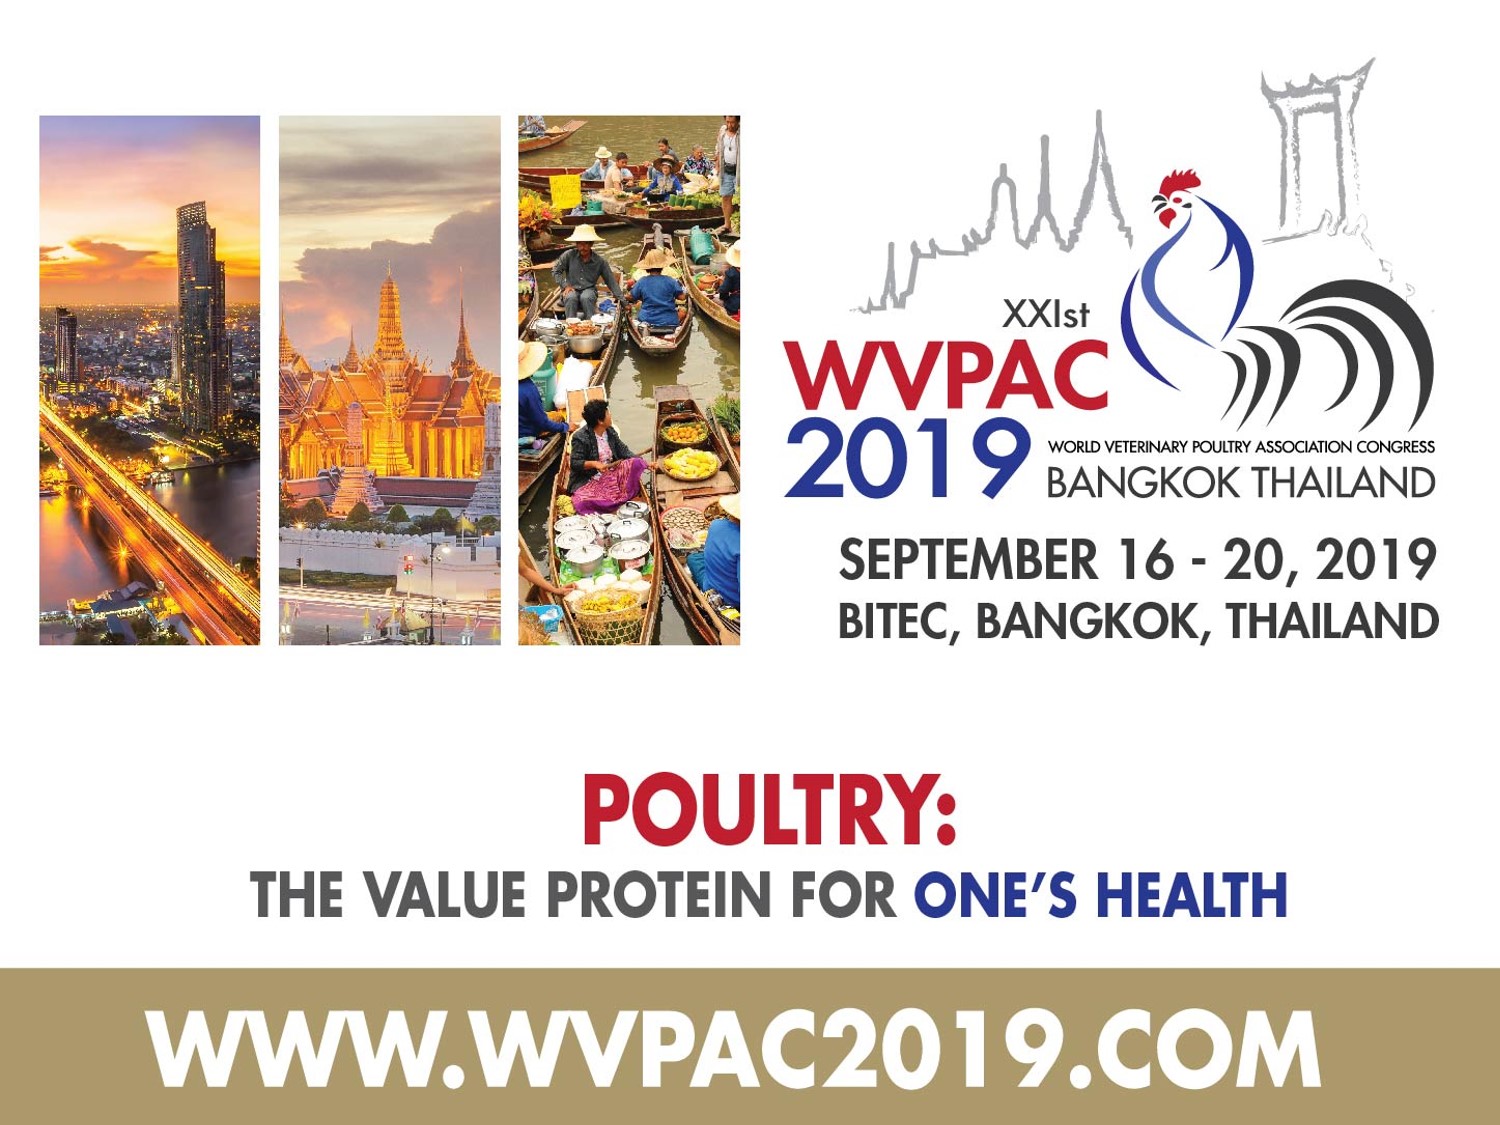 World Veterinary Poultry Association Congress (WVPAC 2019)